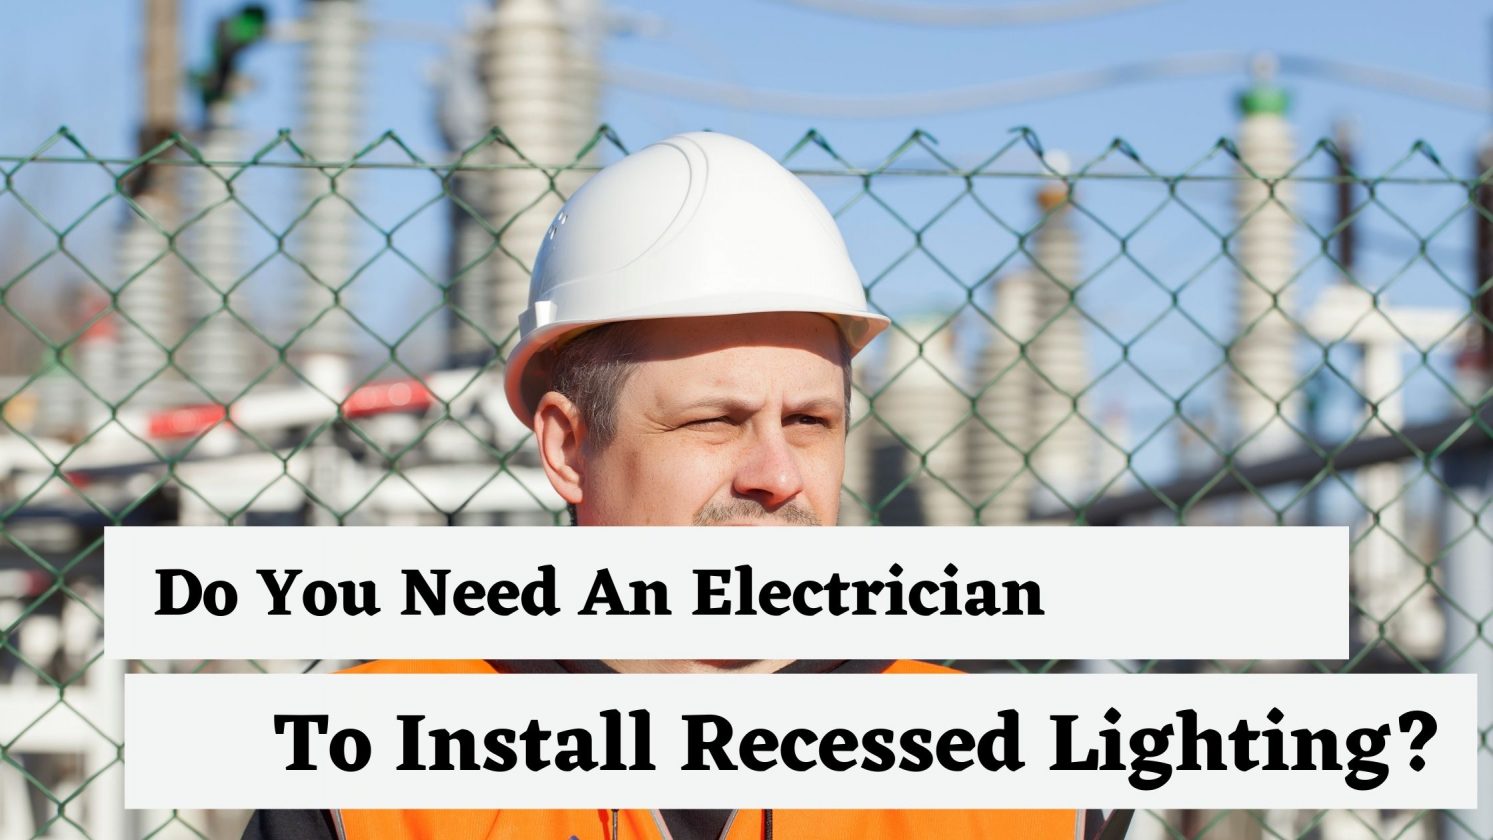 Do You Need An Electrician To Install Recessed Lighting?